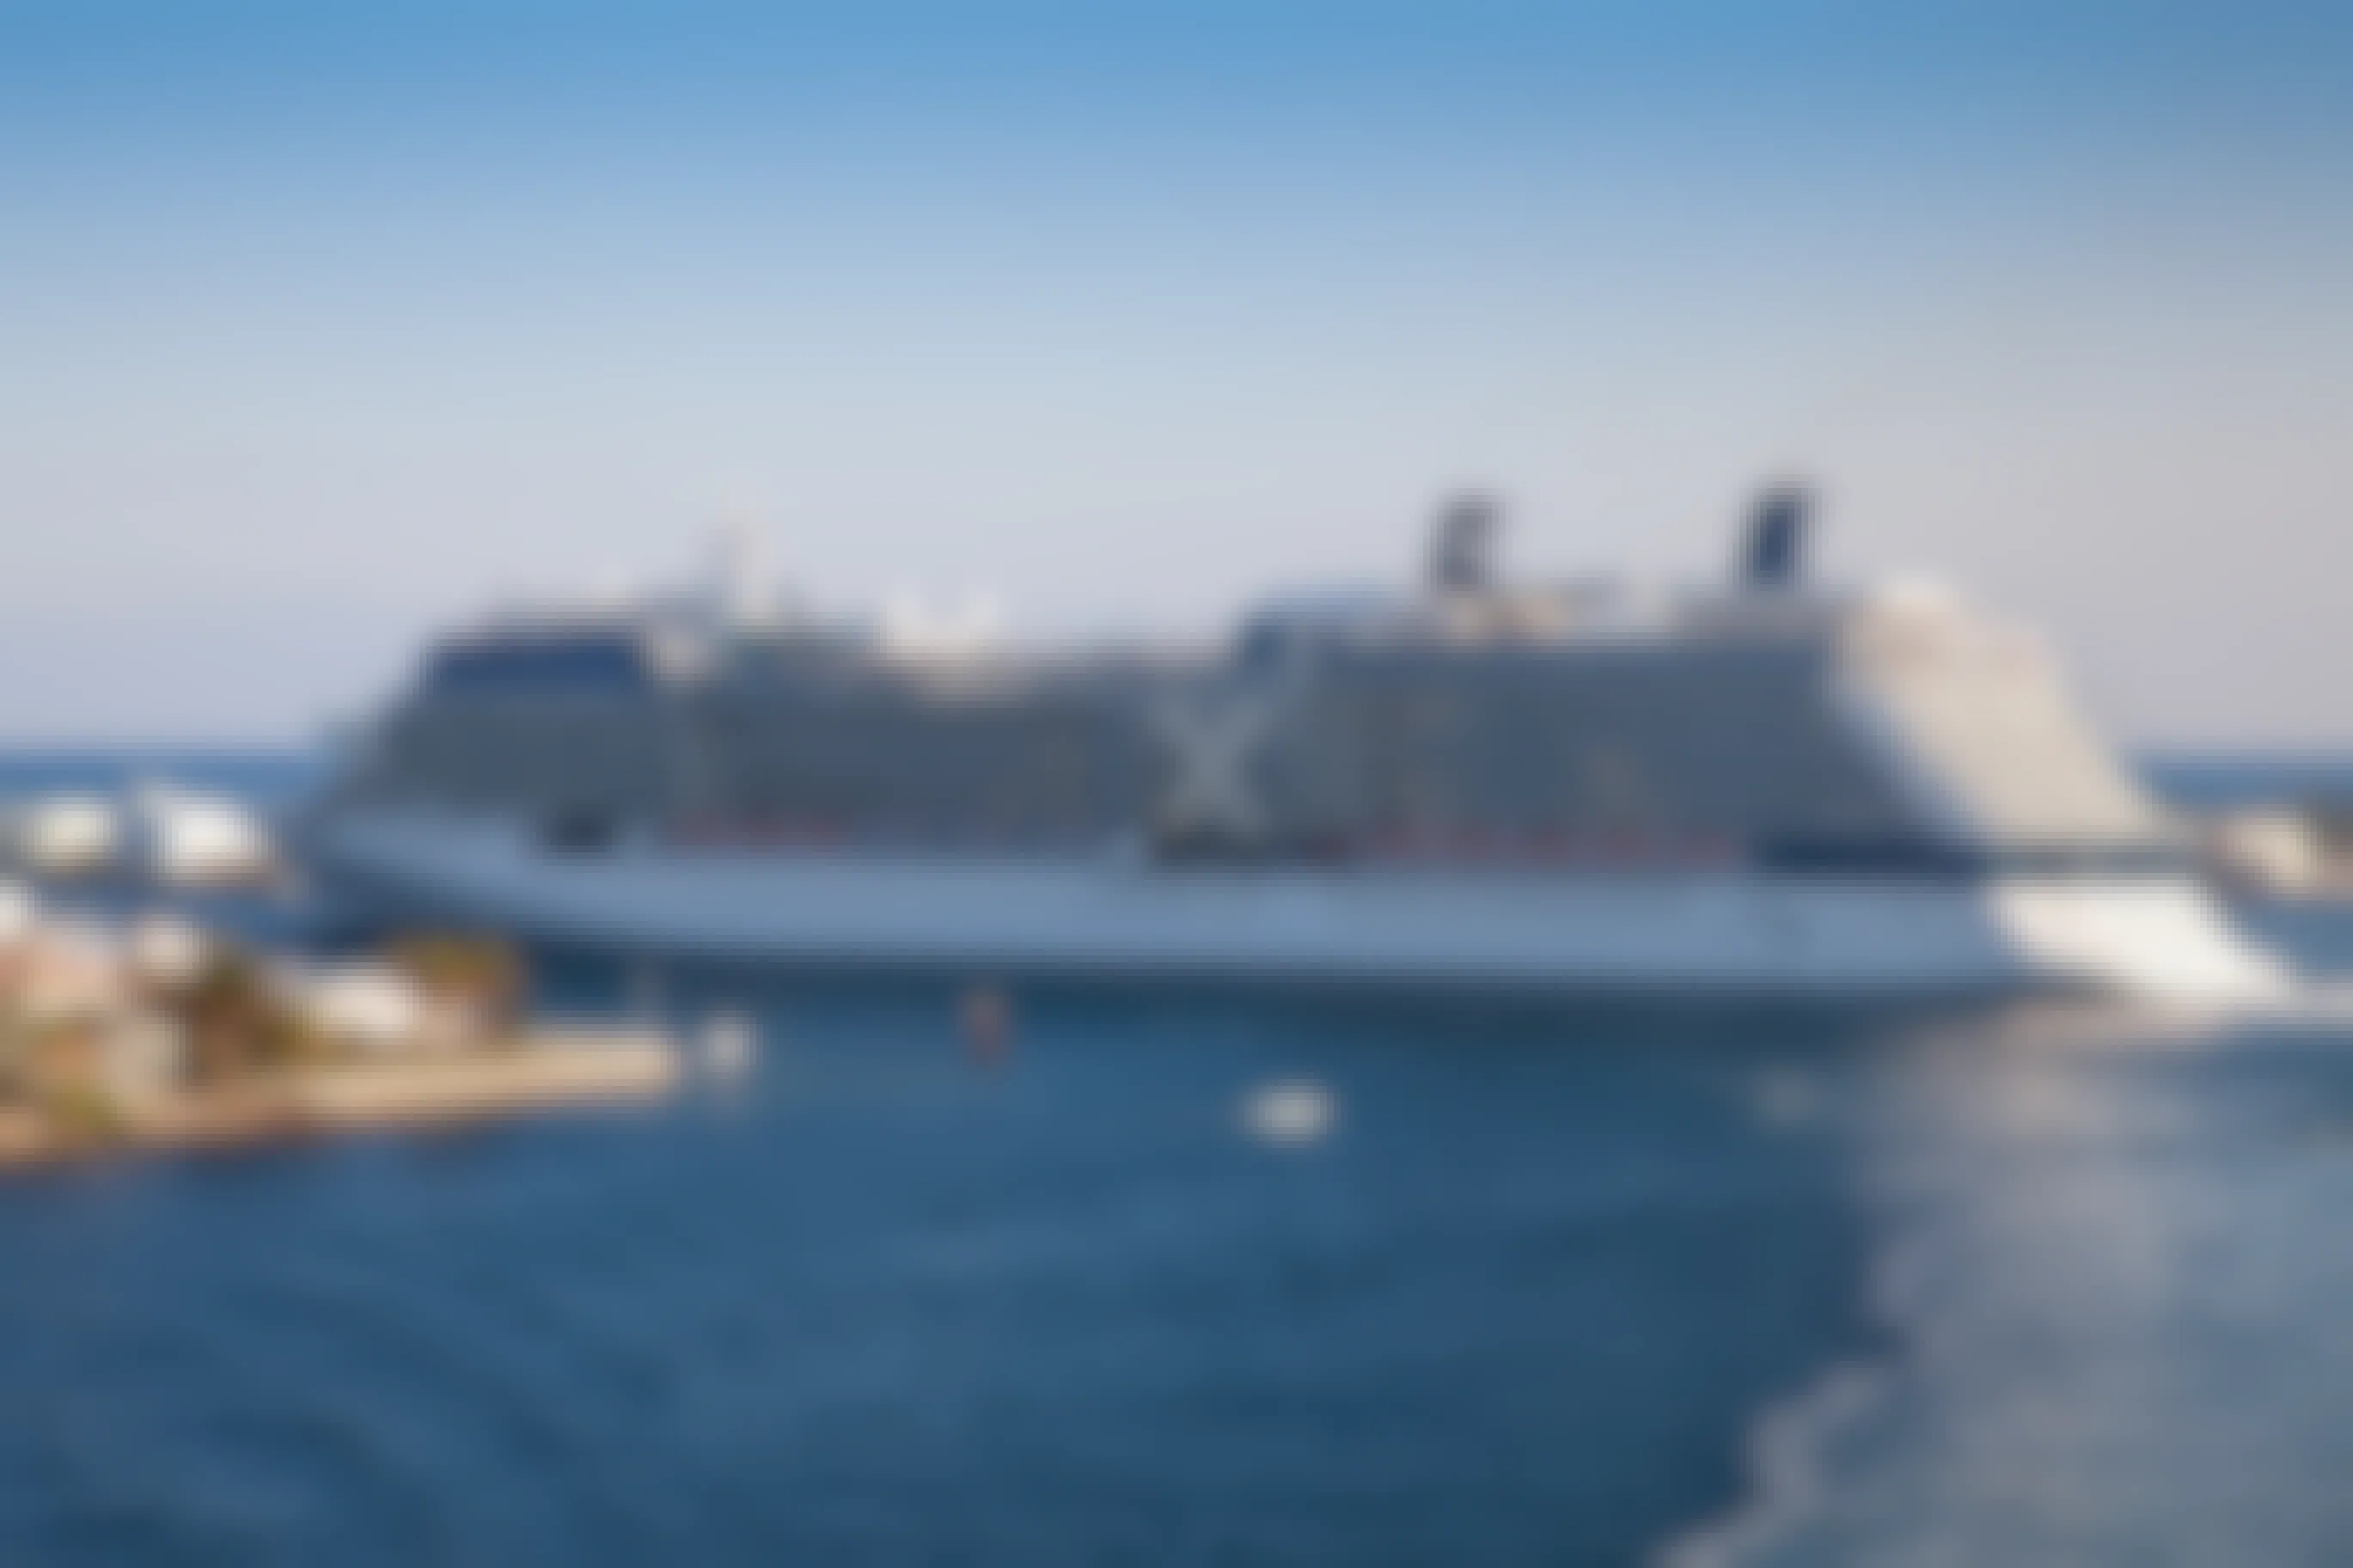 The Celebrity Solstice cruise ship departing from a pier.